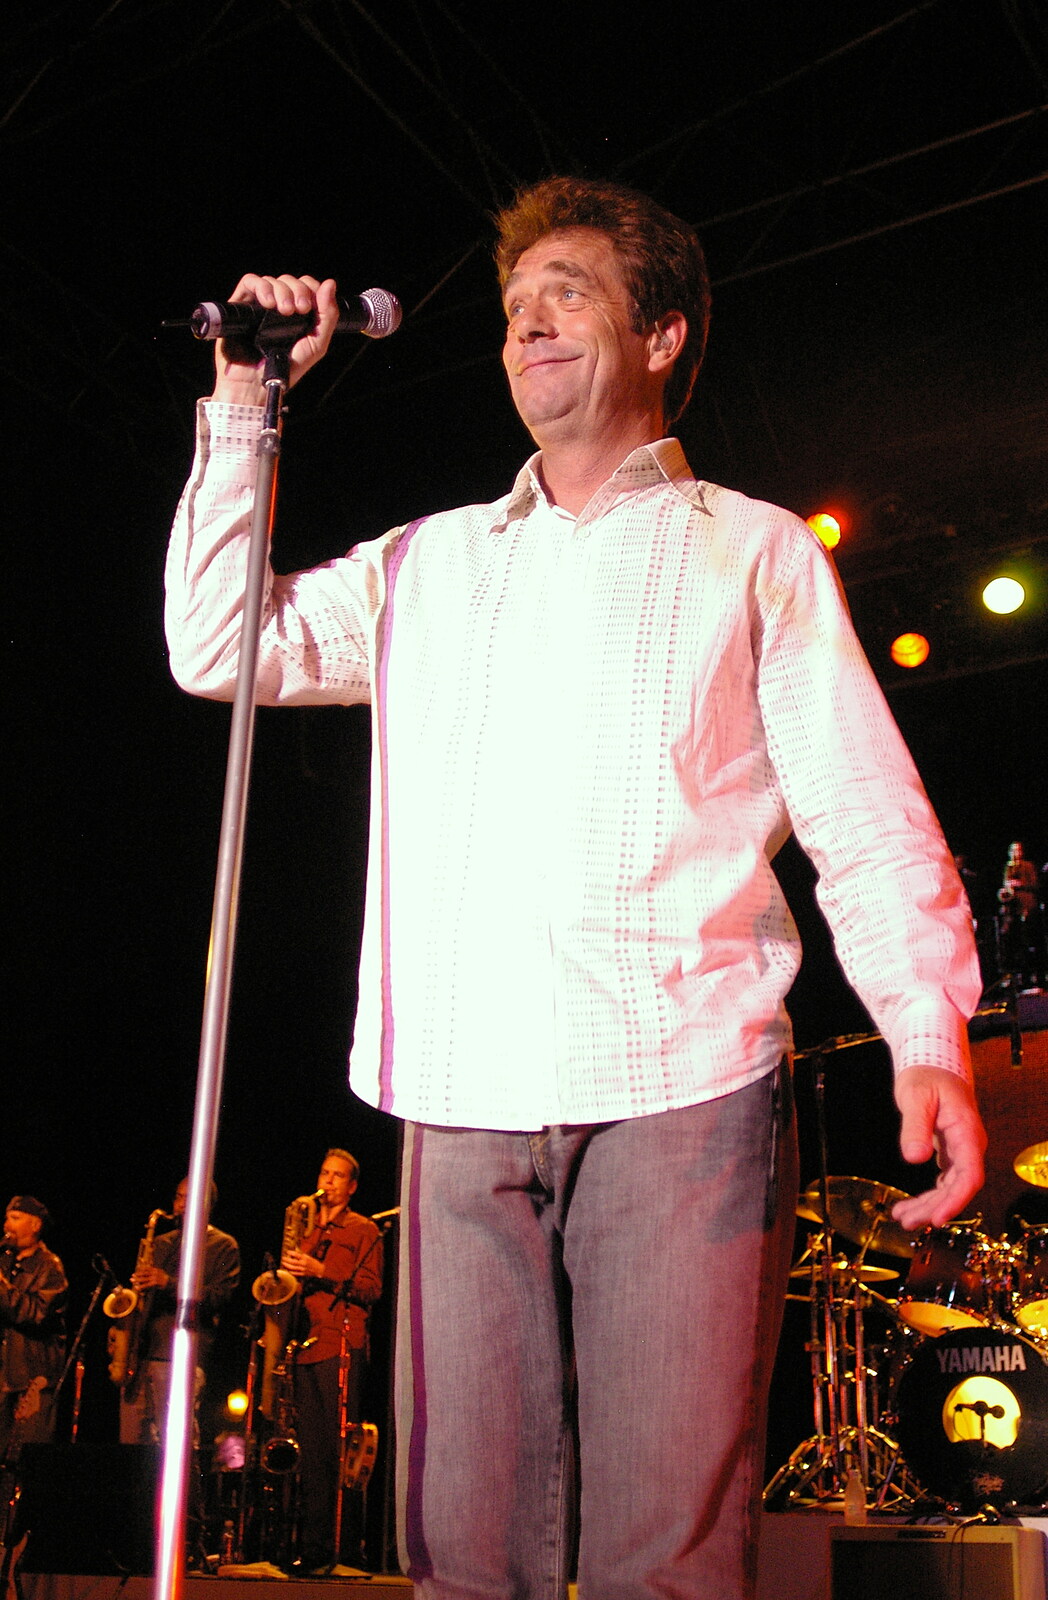 Huey Lewis from BREW Fest and Huey Lewis and the News, Balboa Park, San Diego, California - 2nd June 2005